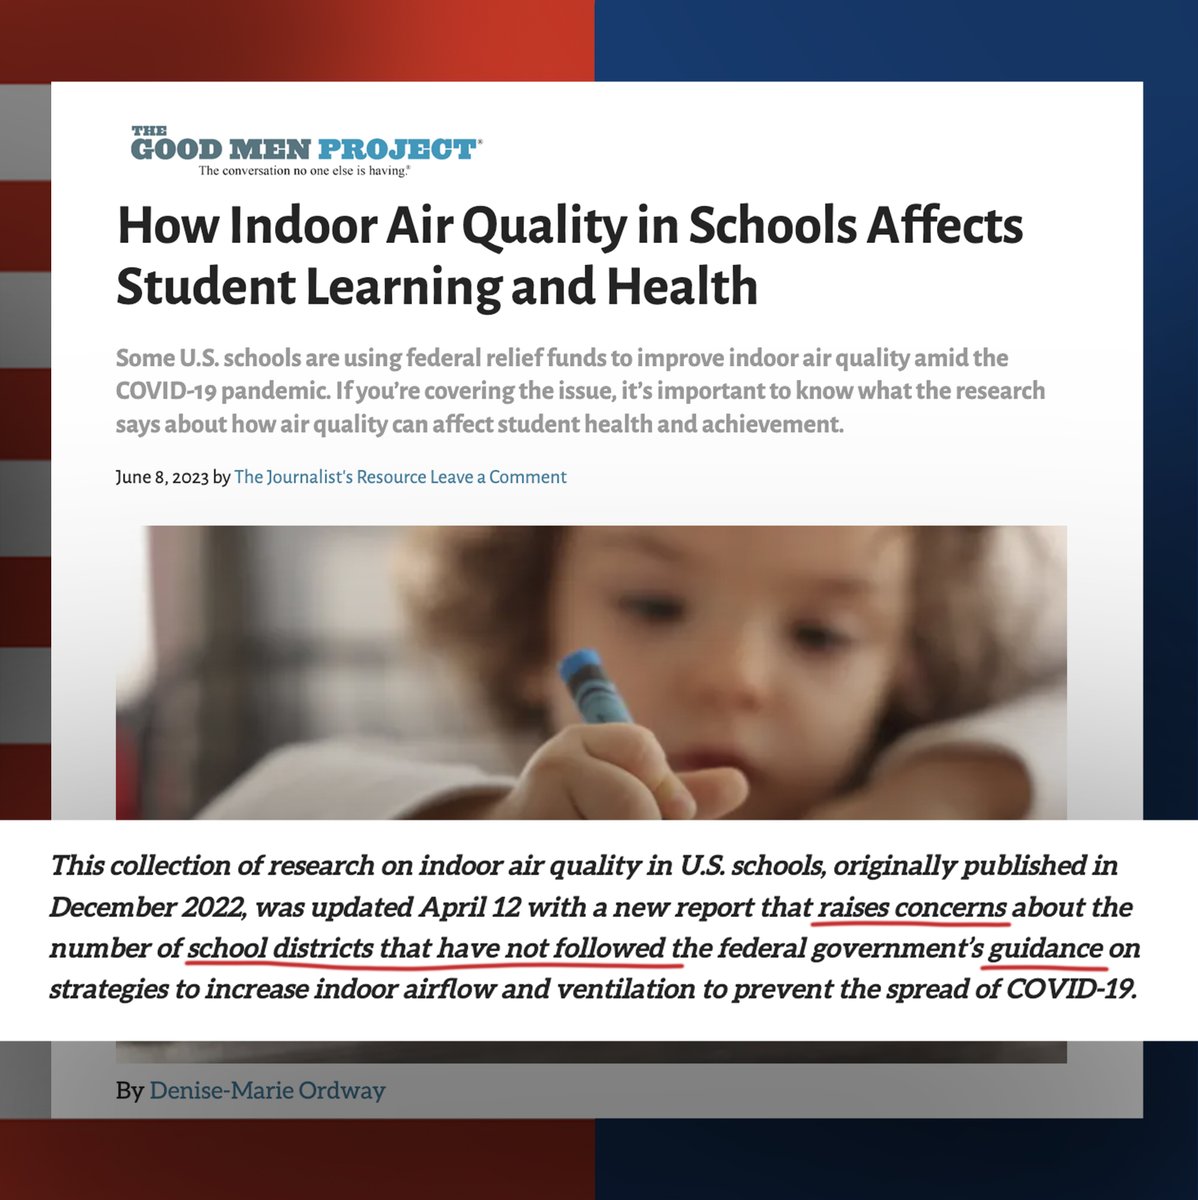 In 2021 @CDCgov recommends ventilation to prevent #Covid & @POTUS announced the distribution of 123B in emerg relief funds to support schools. Yet, CDC’s April23 report shows <49% of Sch. Districts have implemented ventilation improvements @GoodMenProject bit.ly/3NplwNv